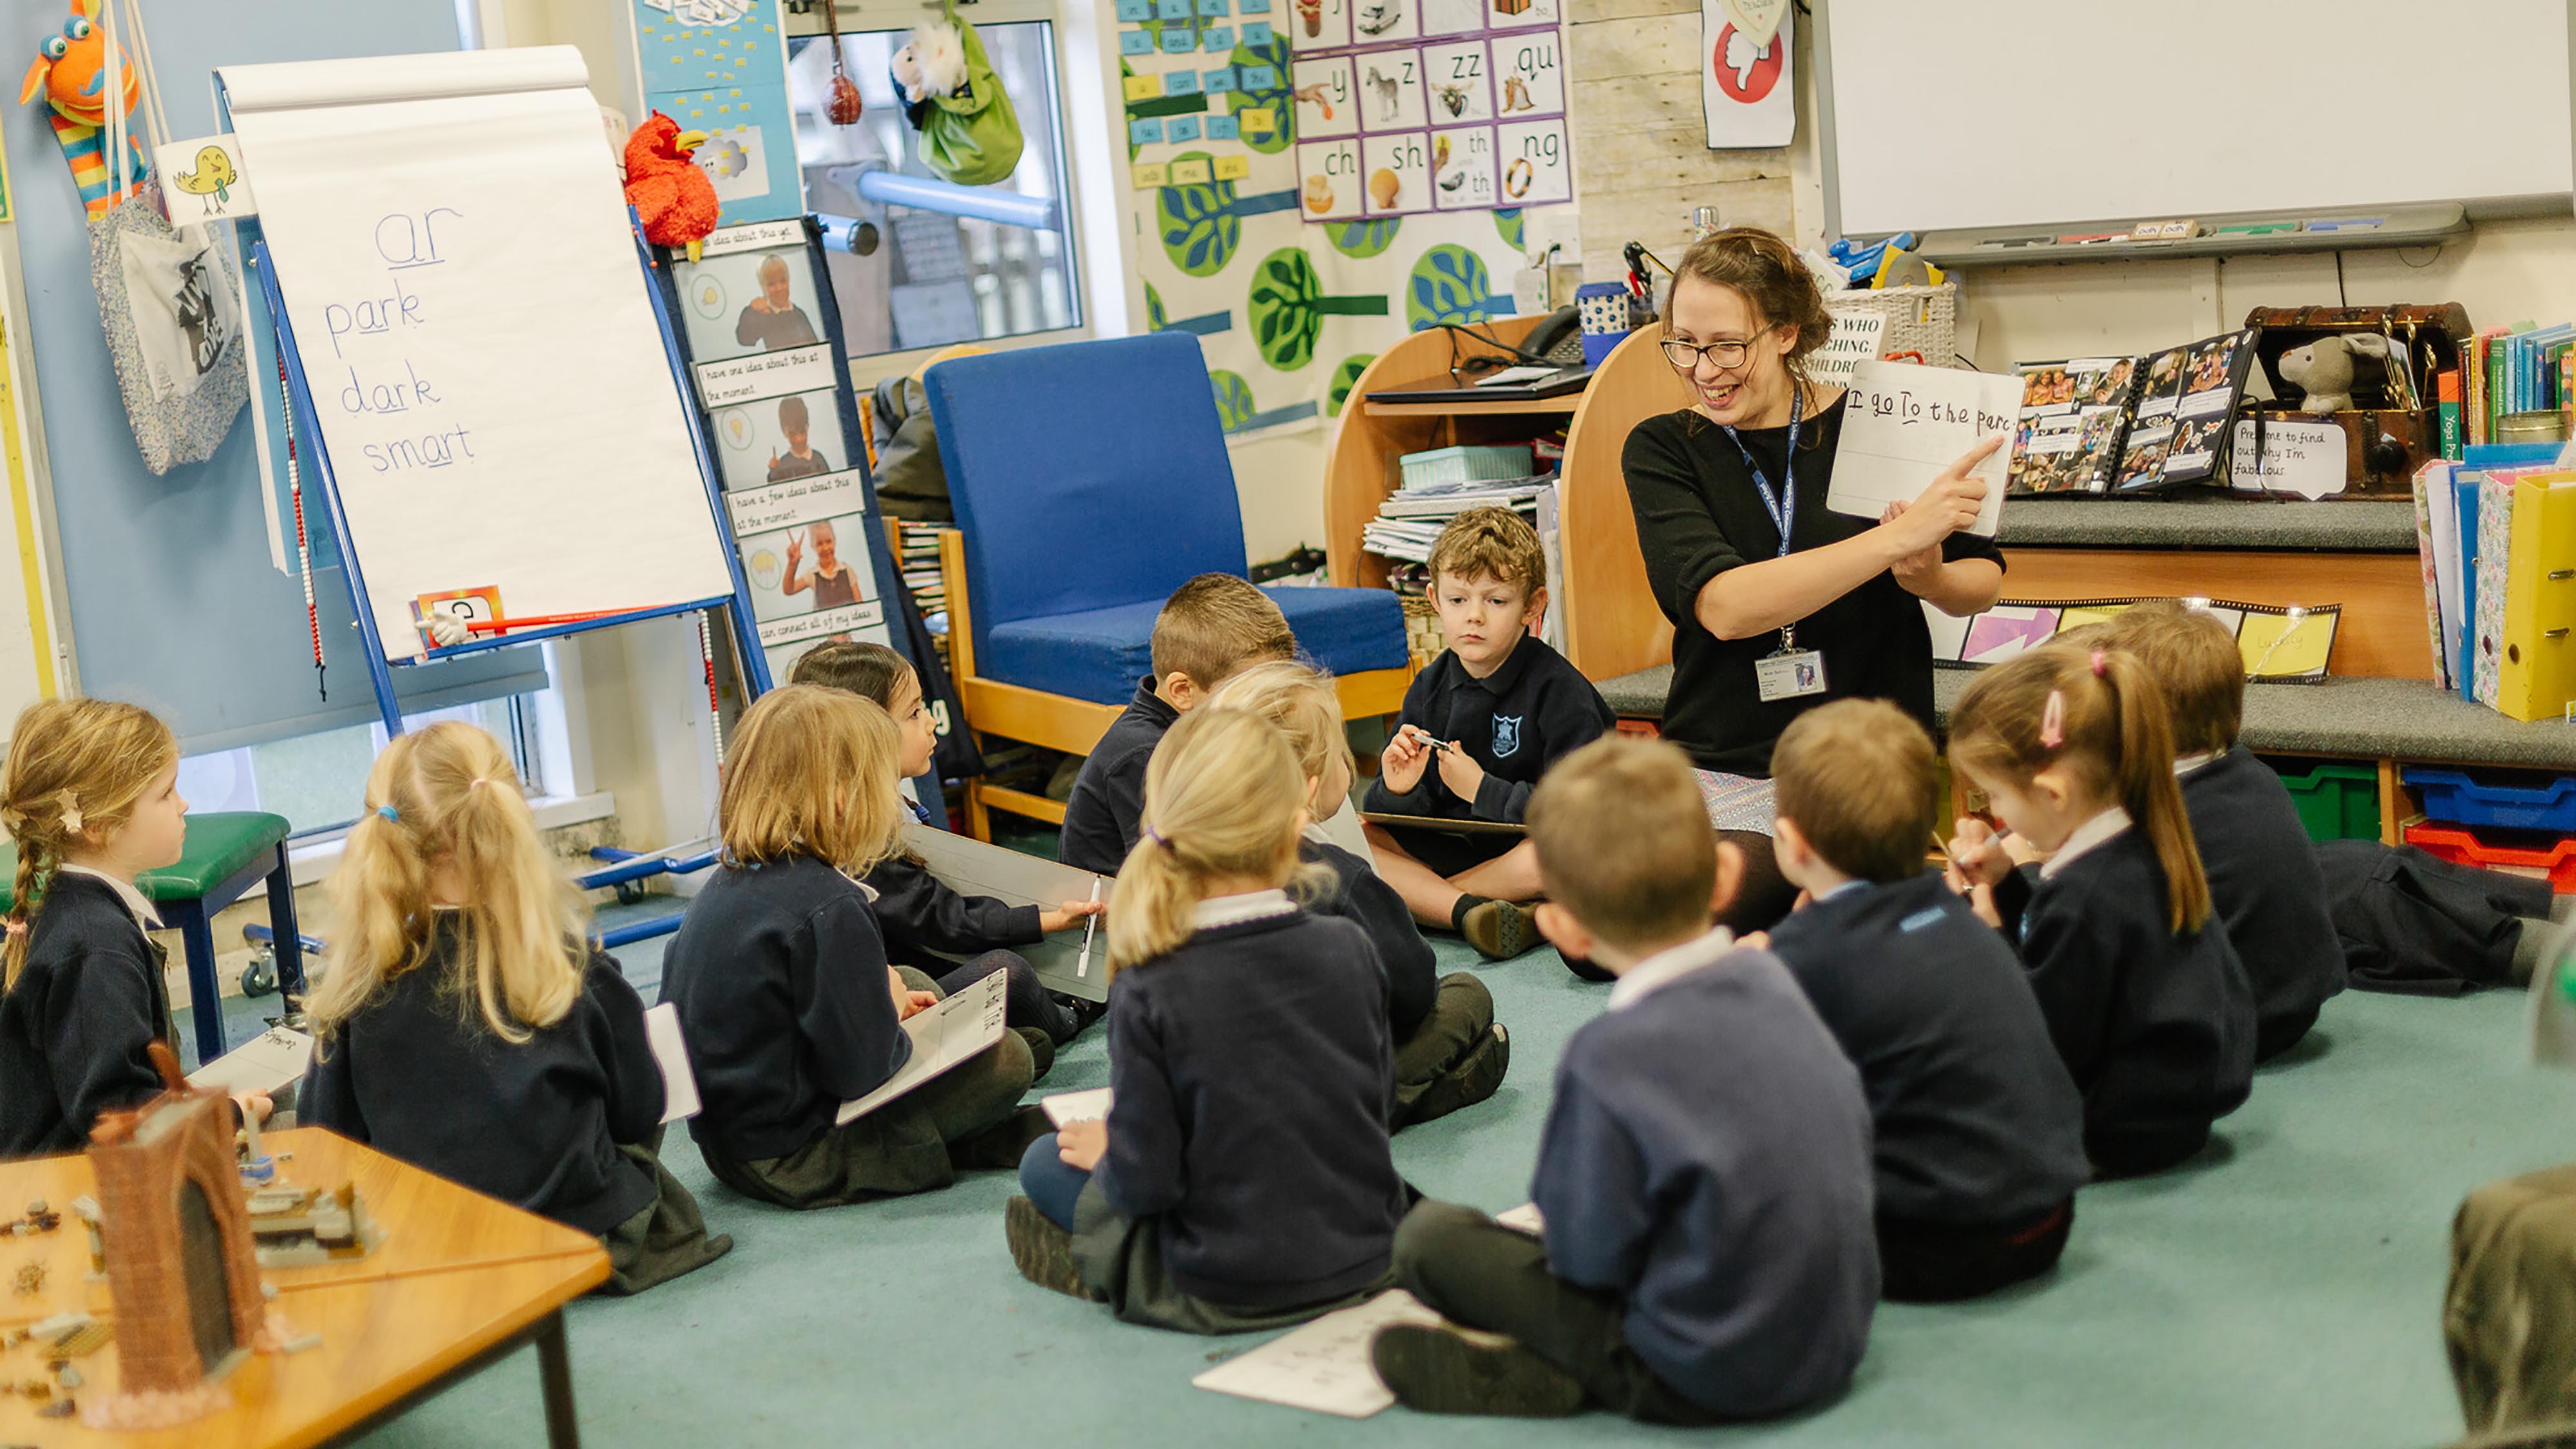 A primary school teacher reads to the class